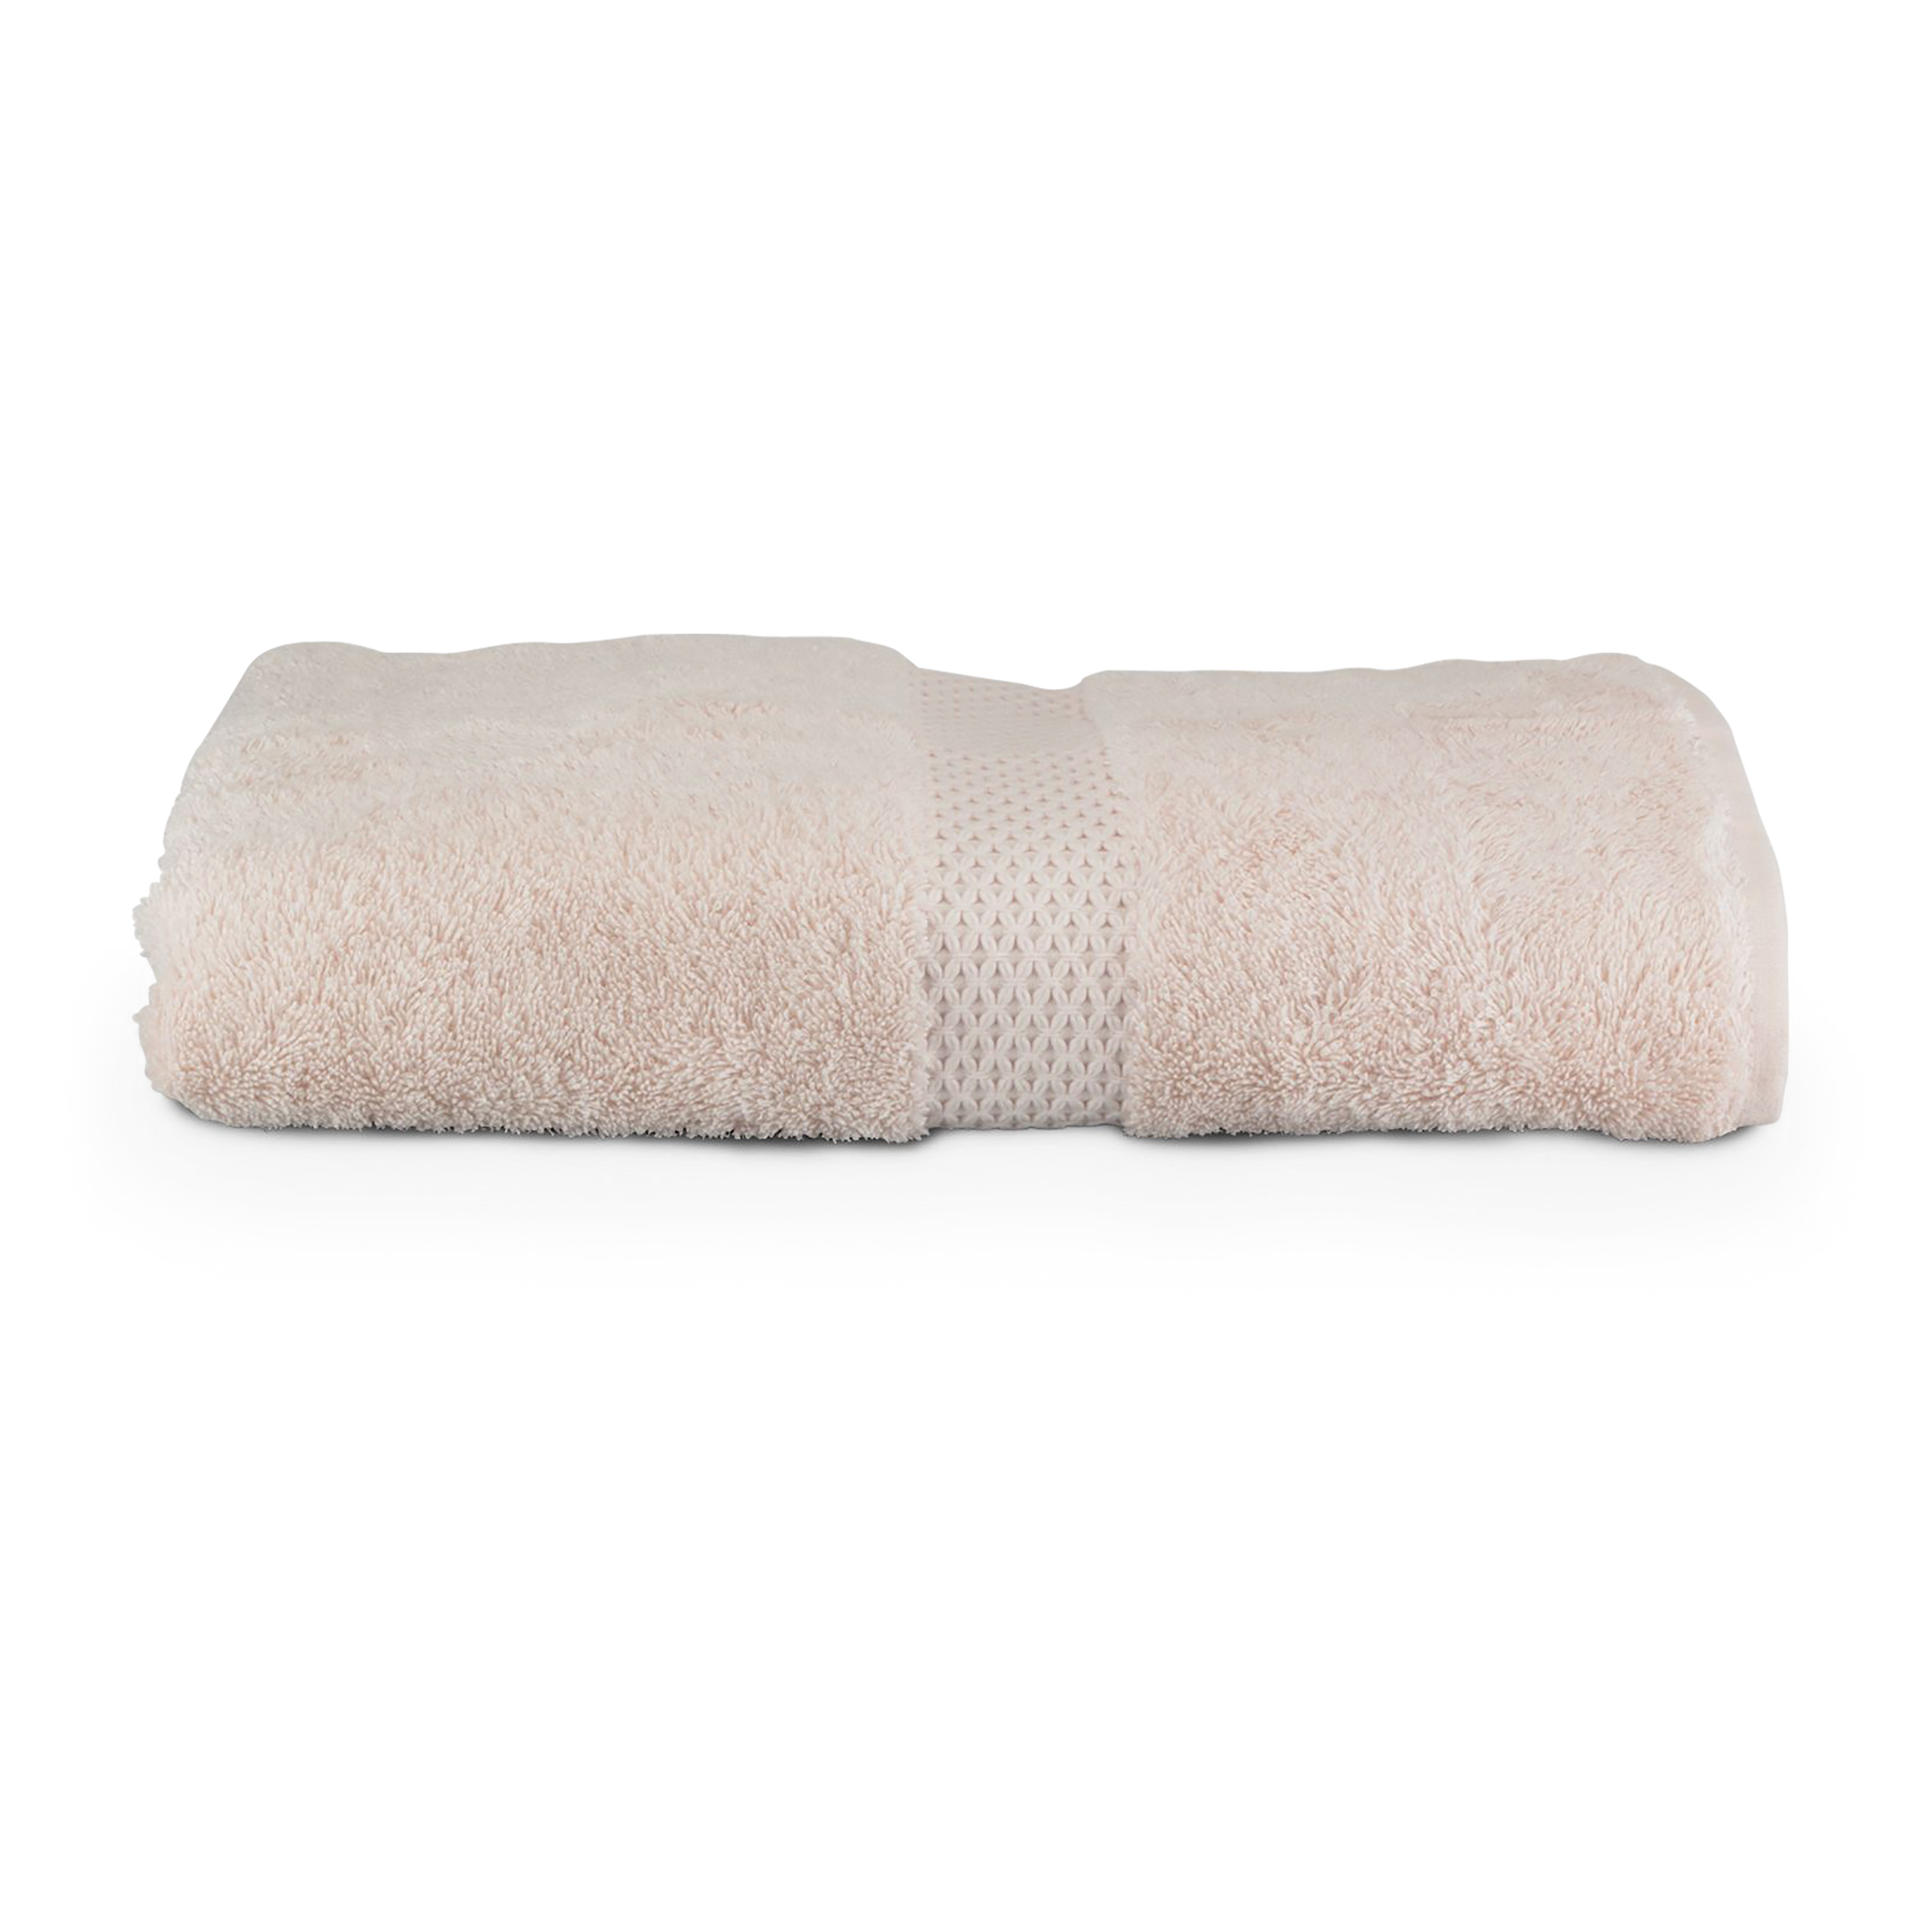 Crafted from a blend of fine, luxurious Egyptian cotton and natural modal, the Etoile collection offers extra softness, durability and absorbency to dry faster than pure cotton tow